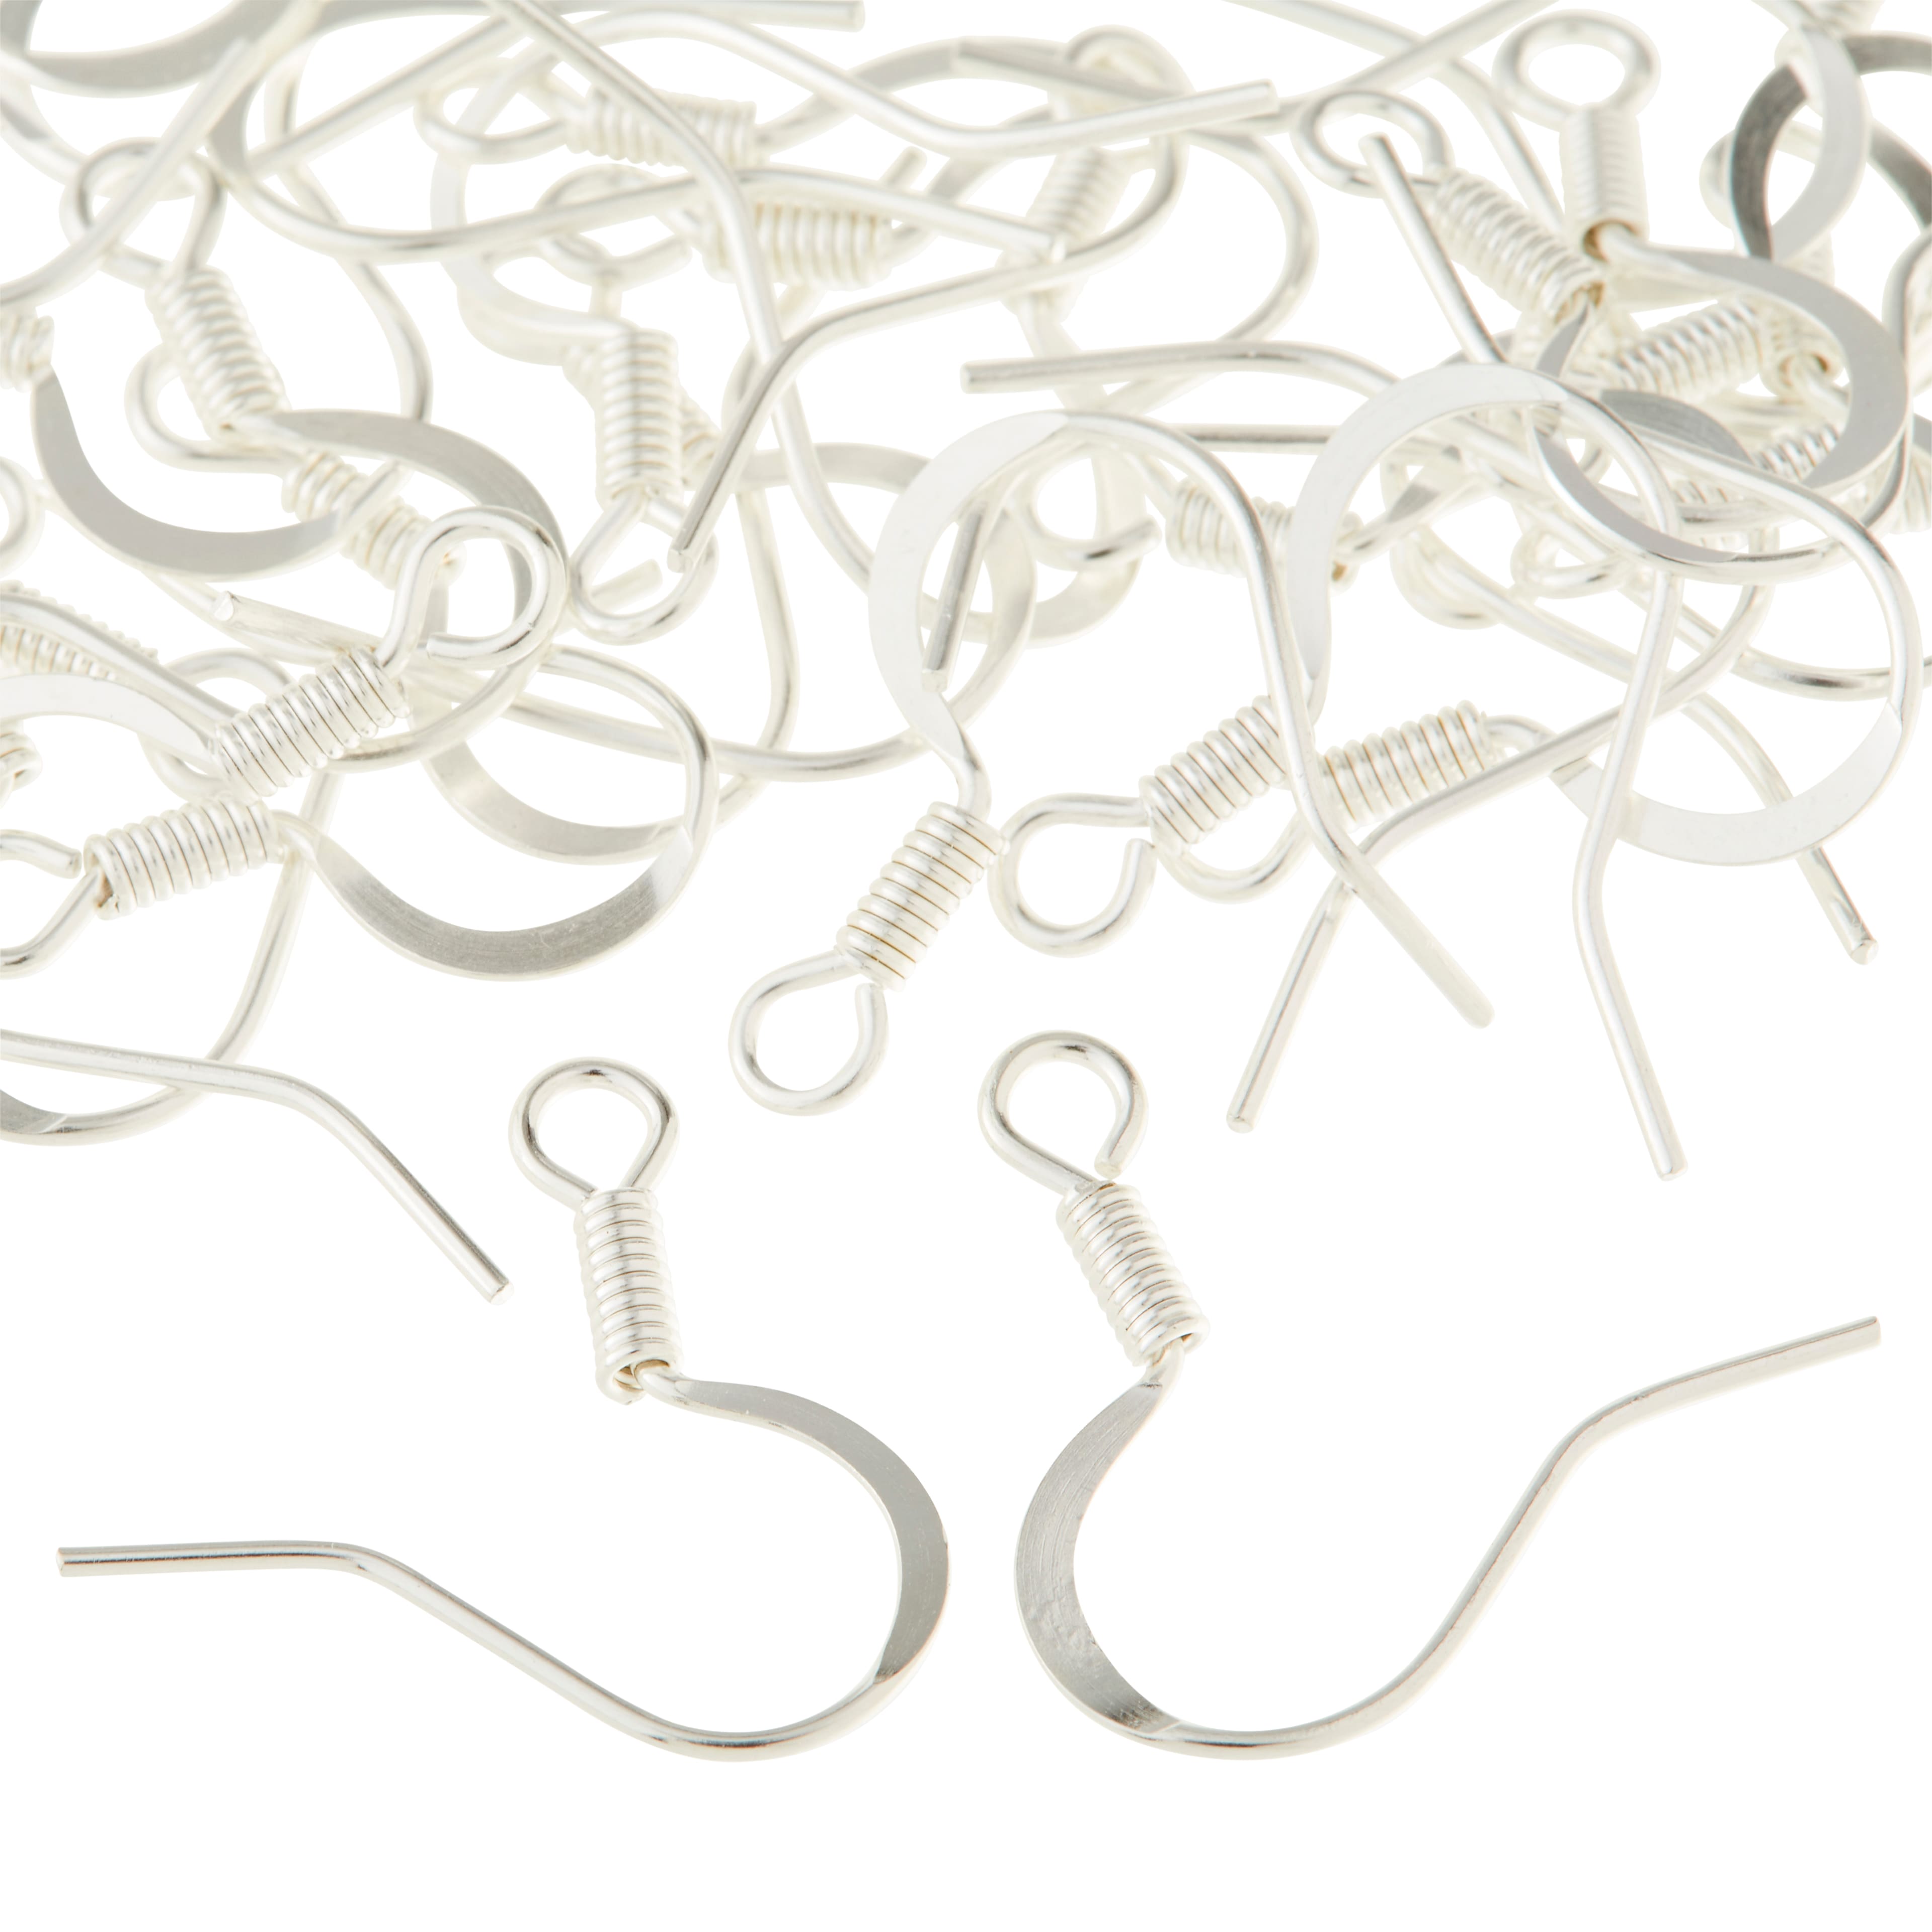 Fish Hook Ear Wires, 20ct. by Bead Landing, Women's, Gold